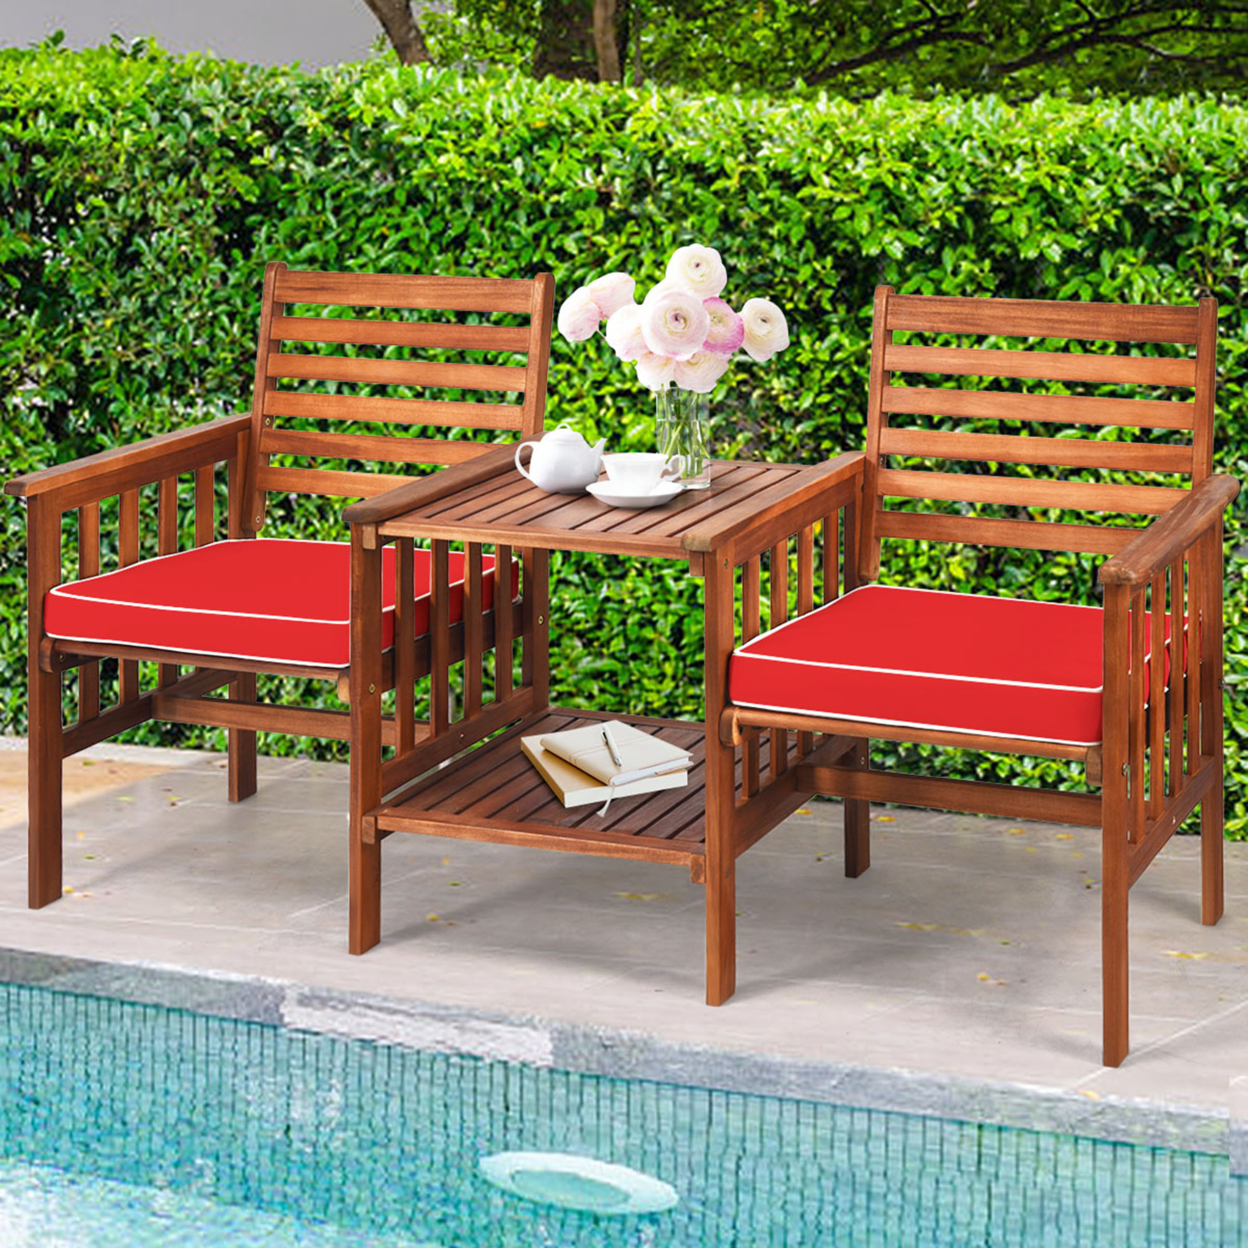 Acacia Wood Loveseat Patio Outdoor Conversation Set W/ Table Red Cushion